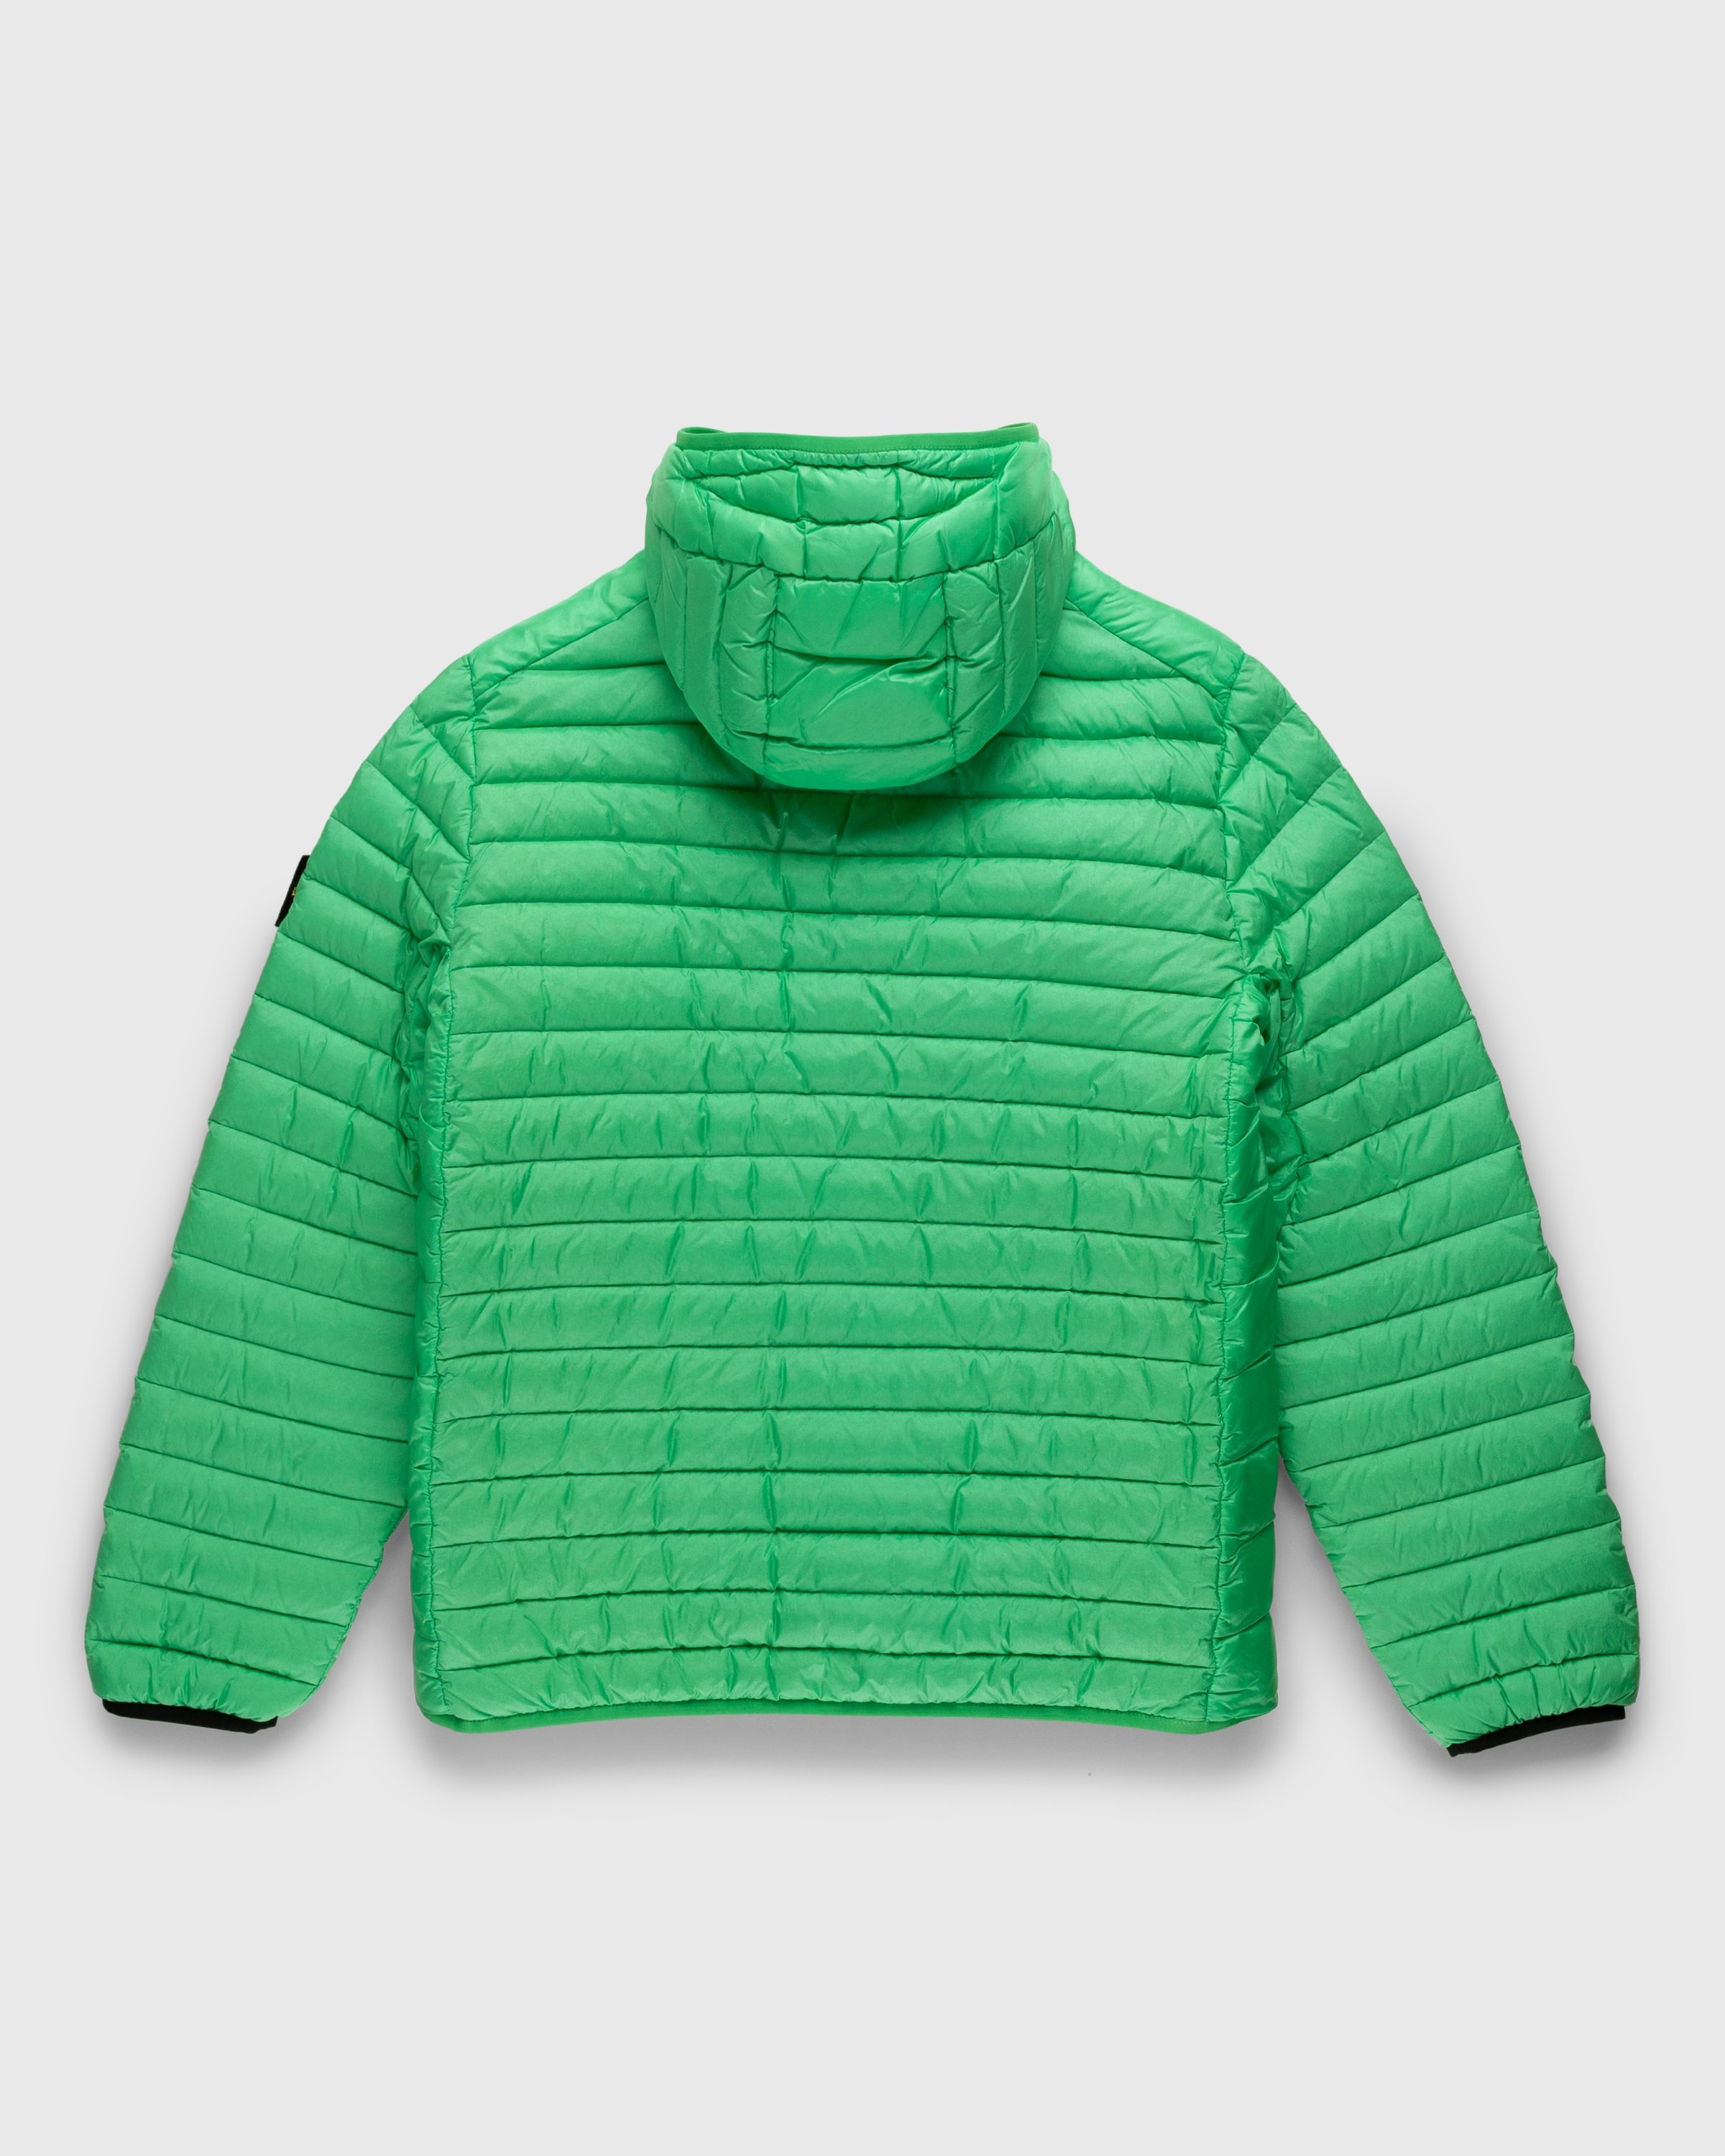 Stone Island – Packable Down Jacket Light Green - Outerwear - Green - Image 2